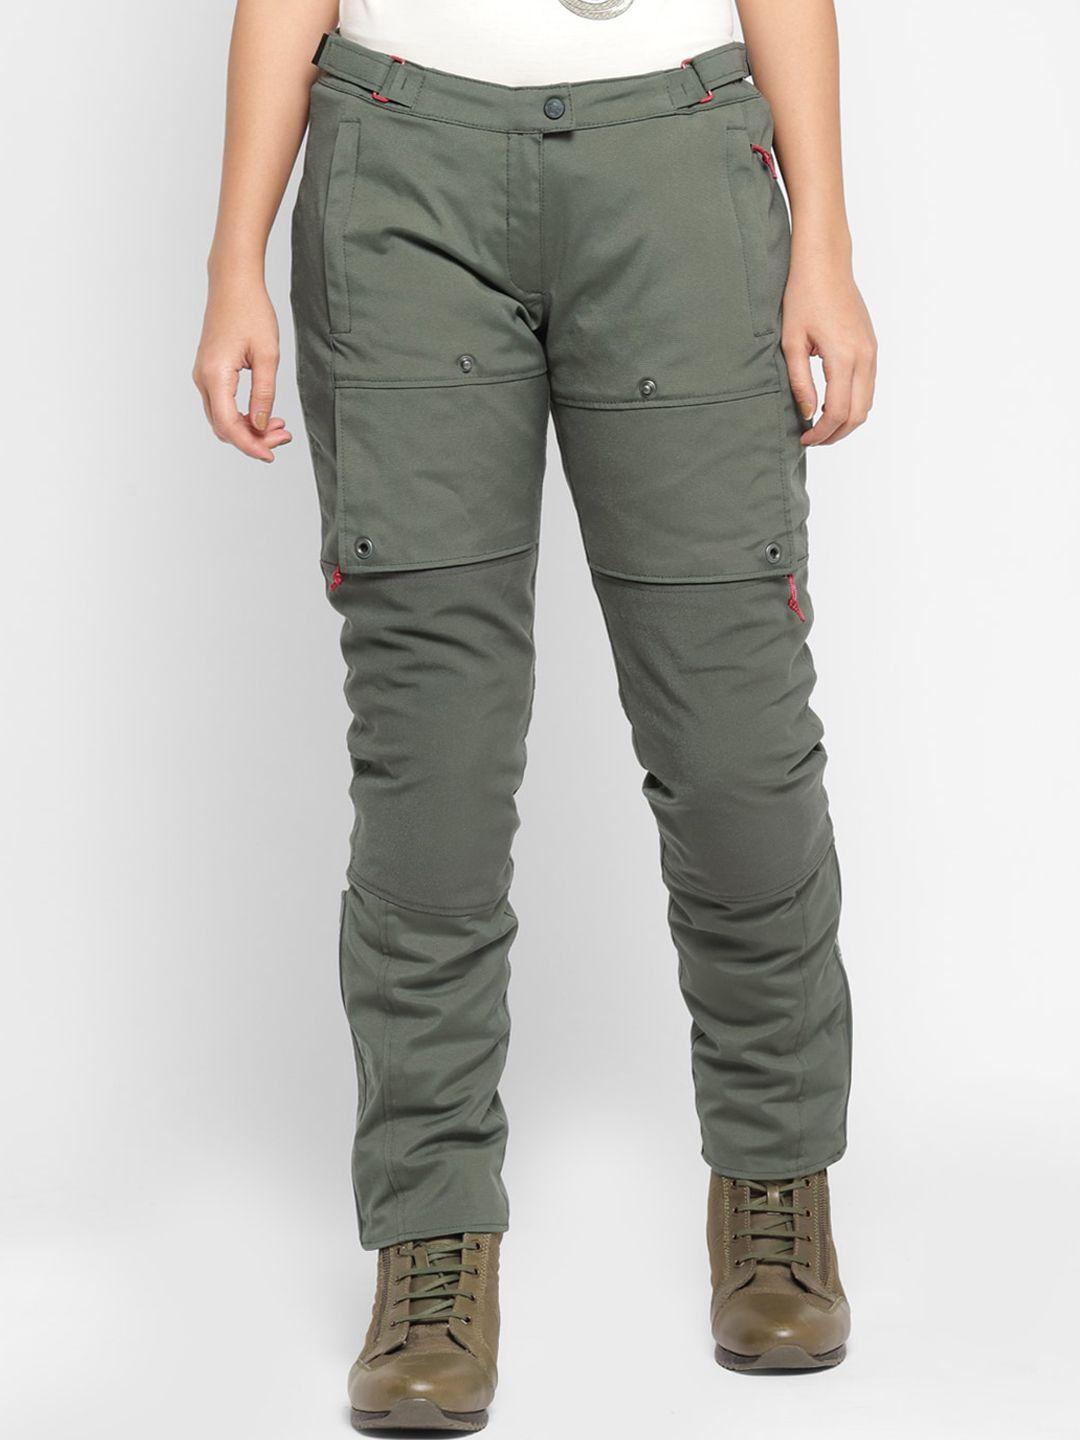 royal enfield women olive green cargos trousers